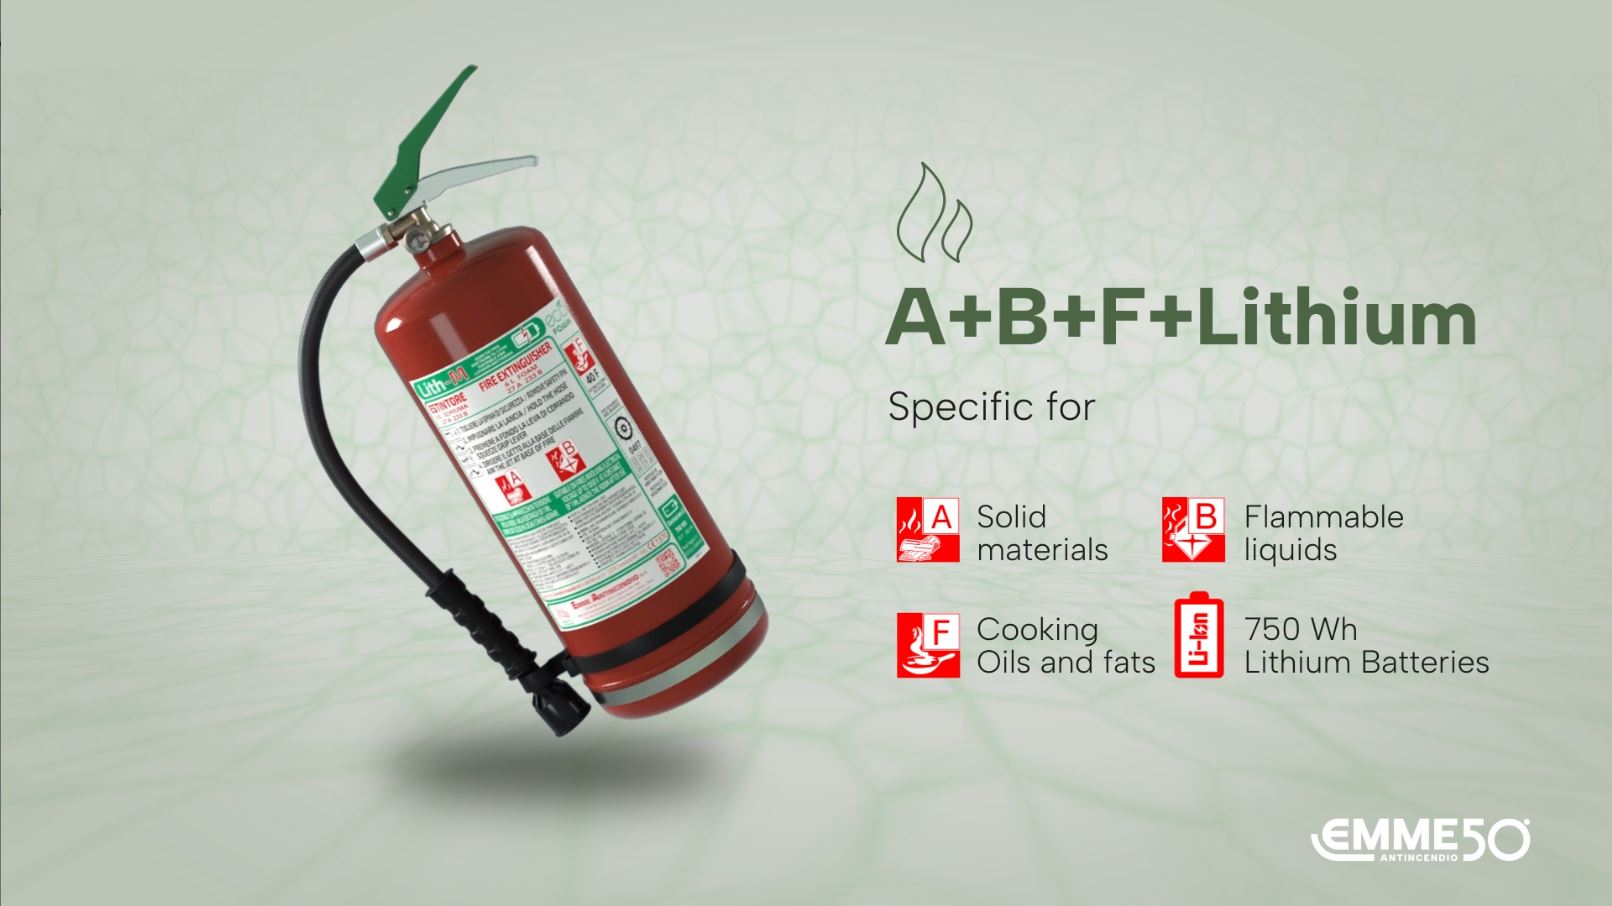 6 L Foam Fire Extinguisher to stop the combustion of a lithium battery - Model 22066-35